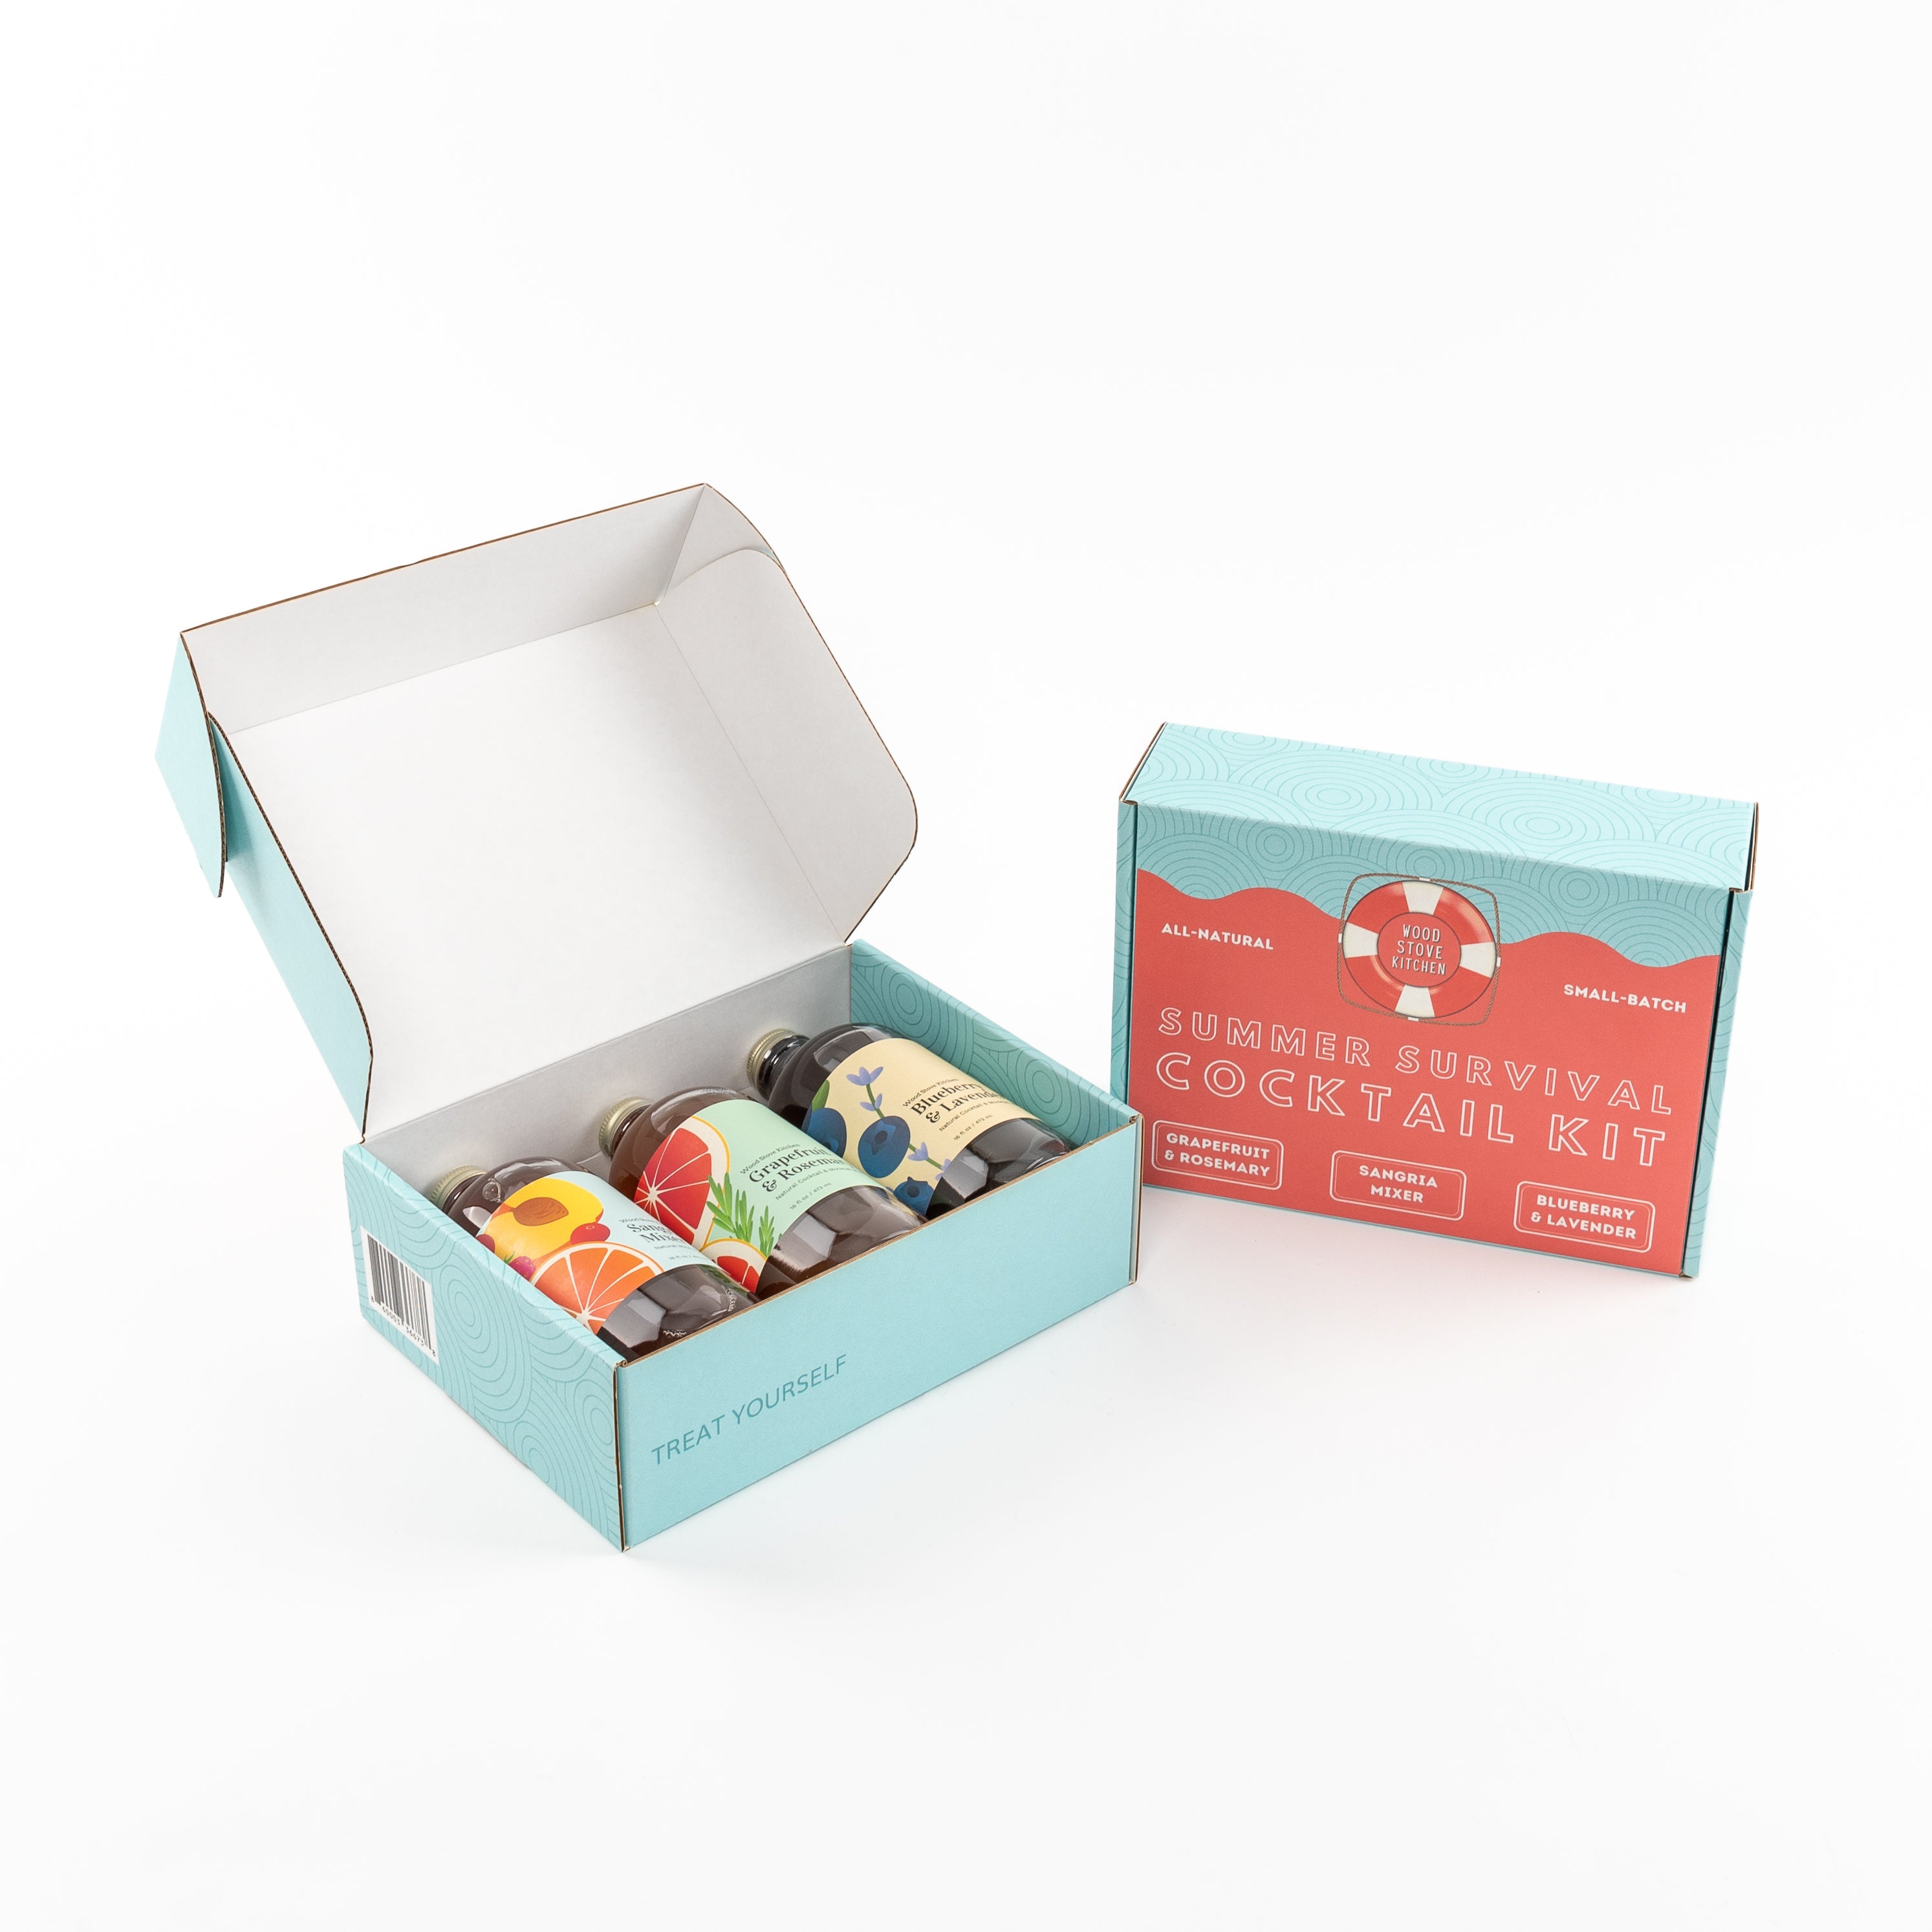 Cove Cocktail Kit & Hope Cove Candle Gift Box - Devon Cove Produce Limited